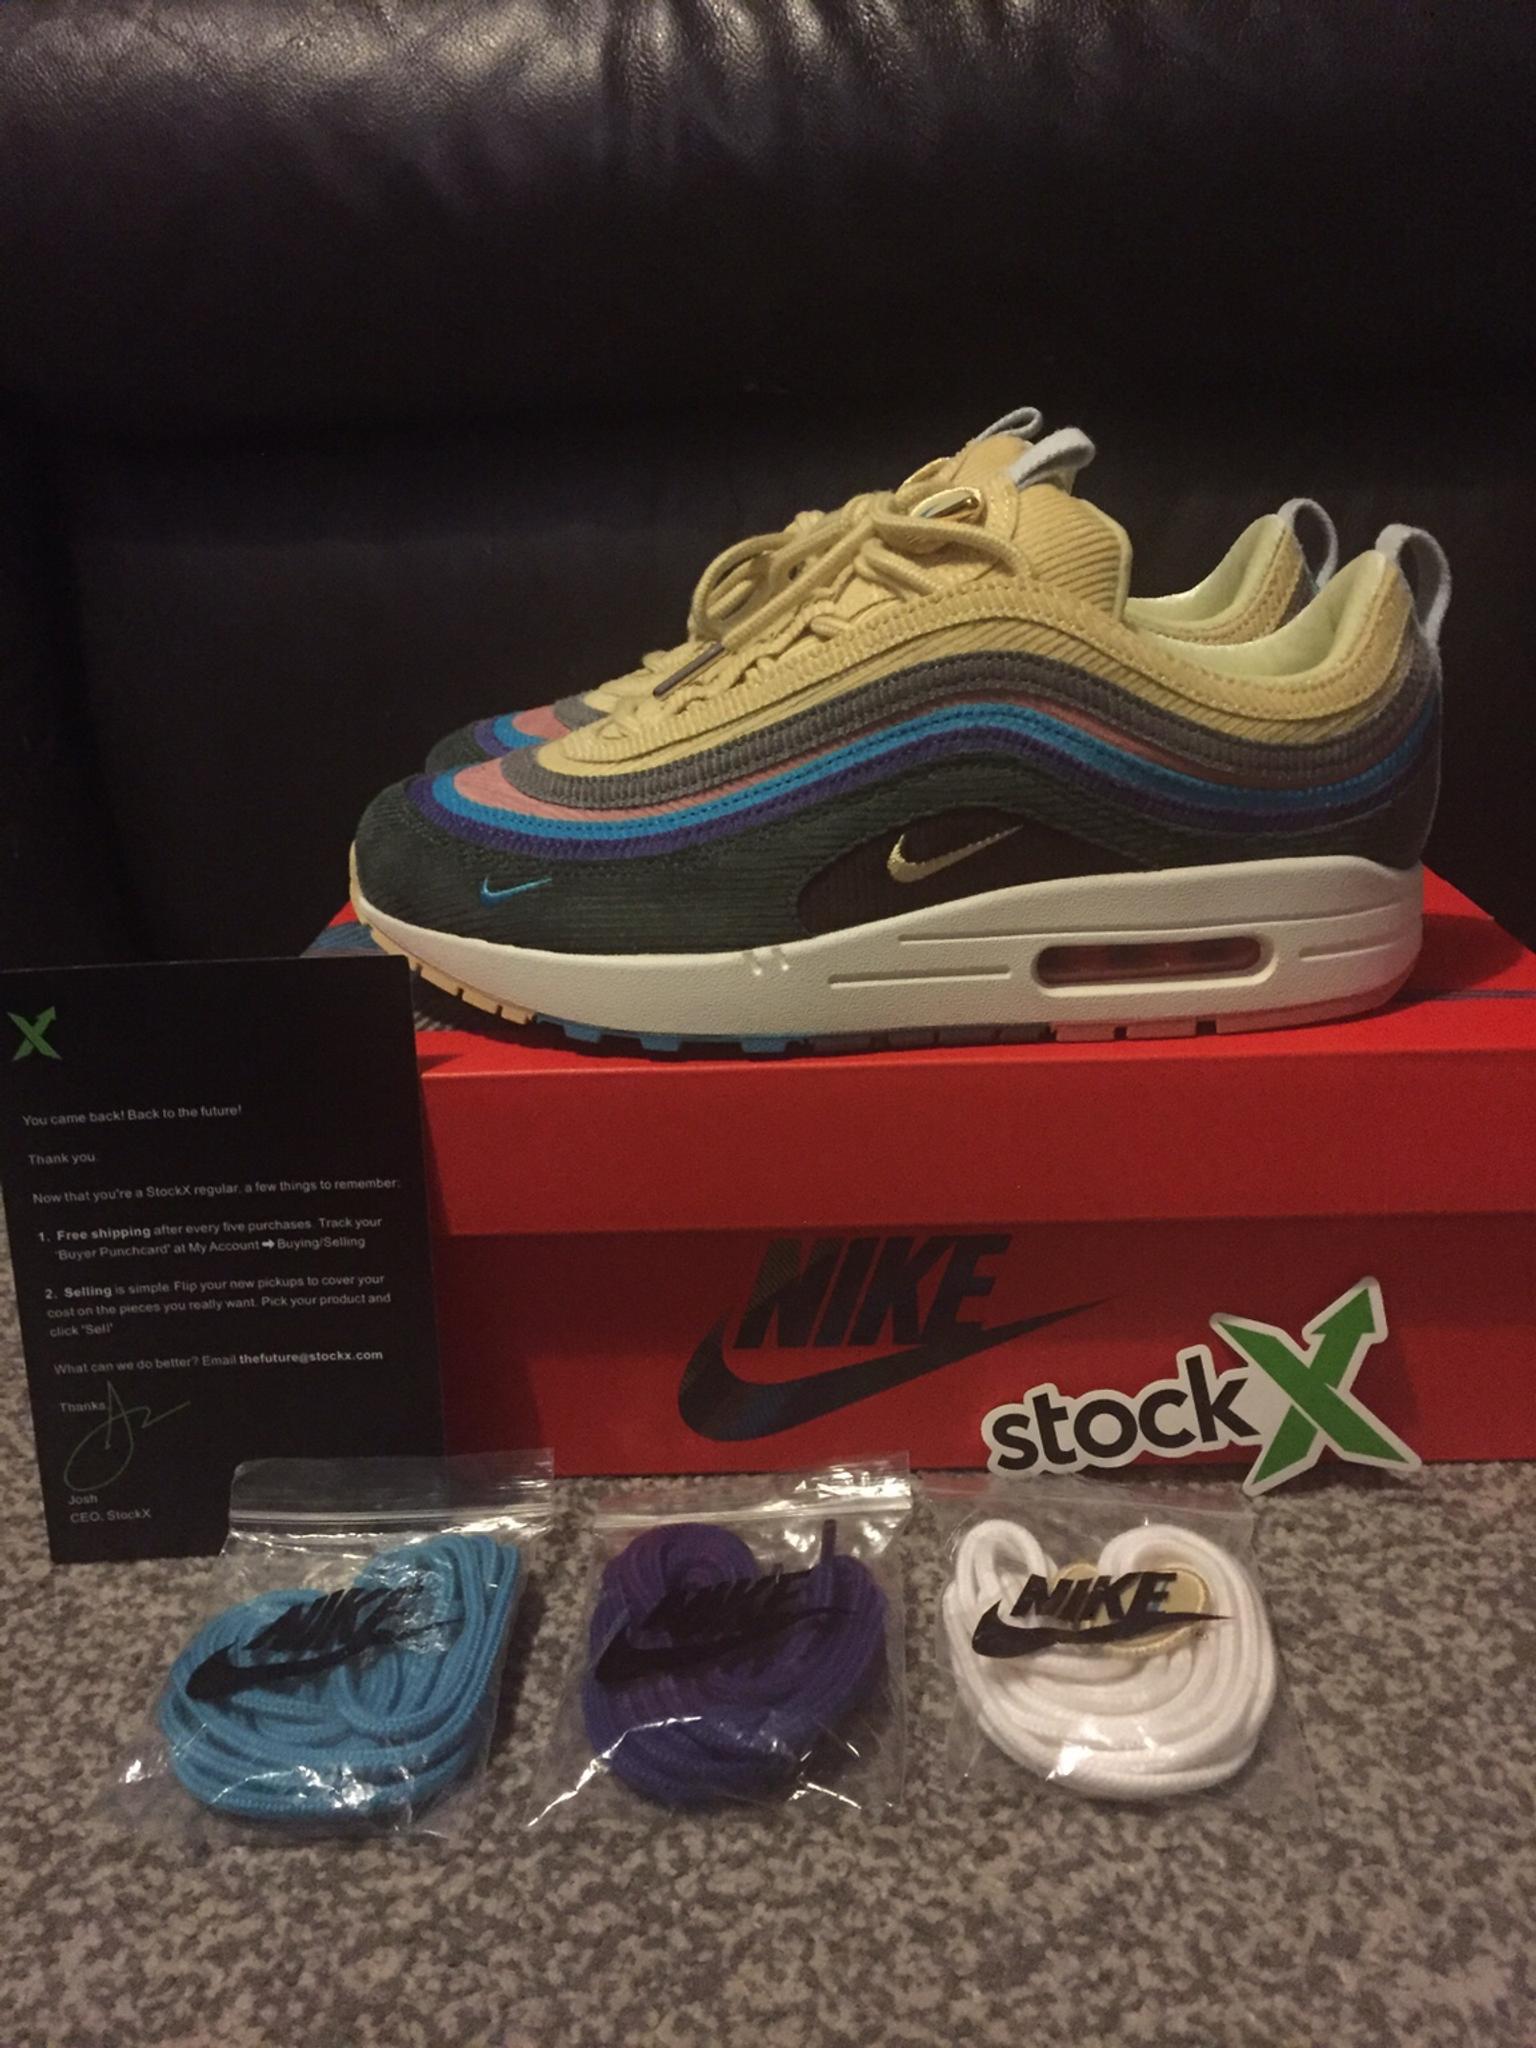 nike air max 97 sean wotherspoon stockx